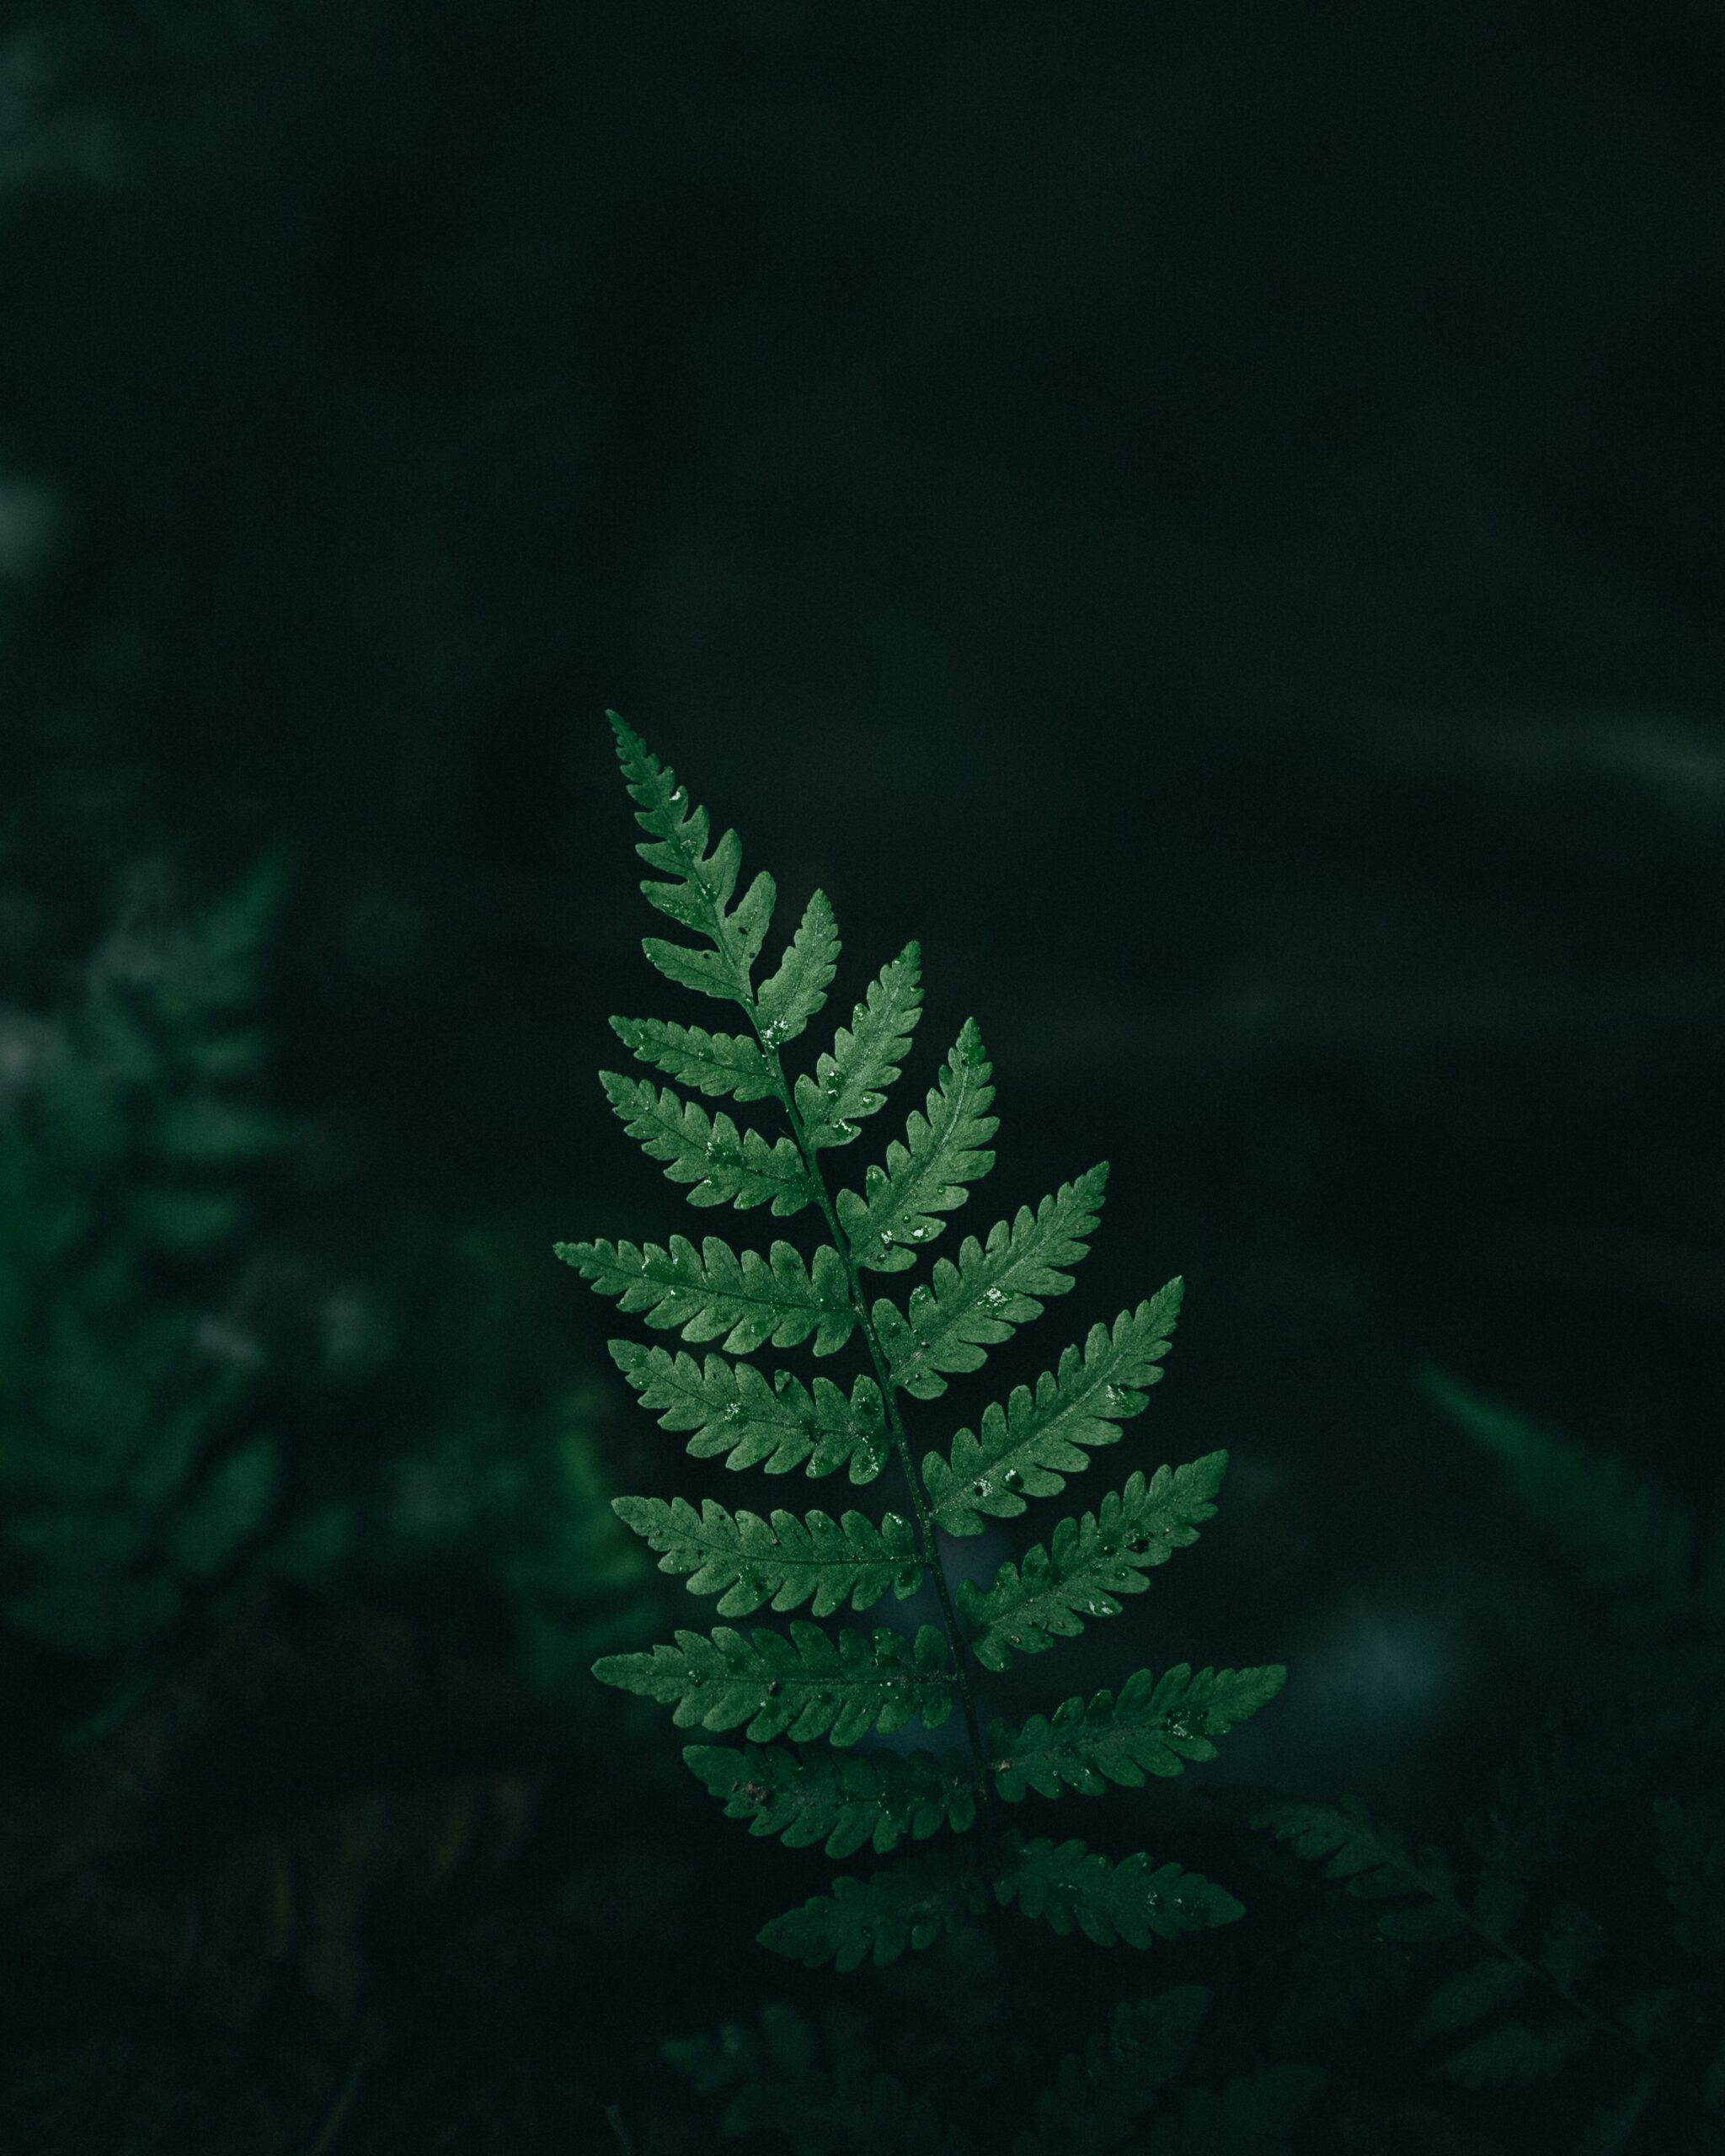 A close up image of a fern fron with a dark background.